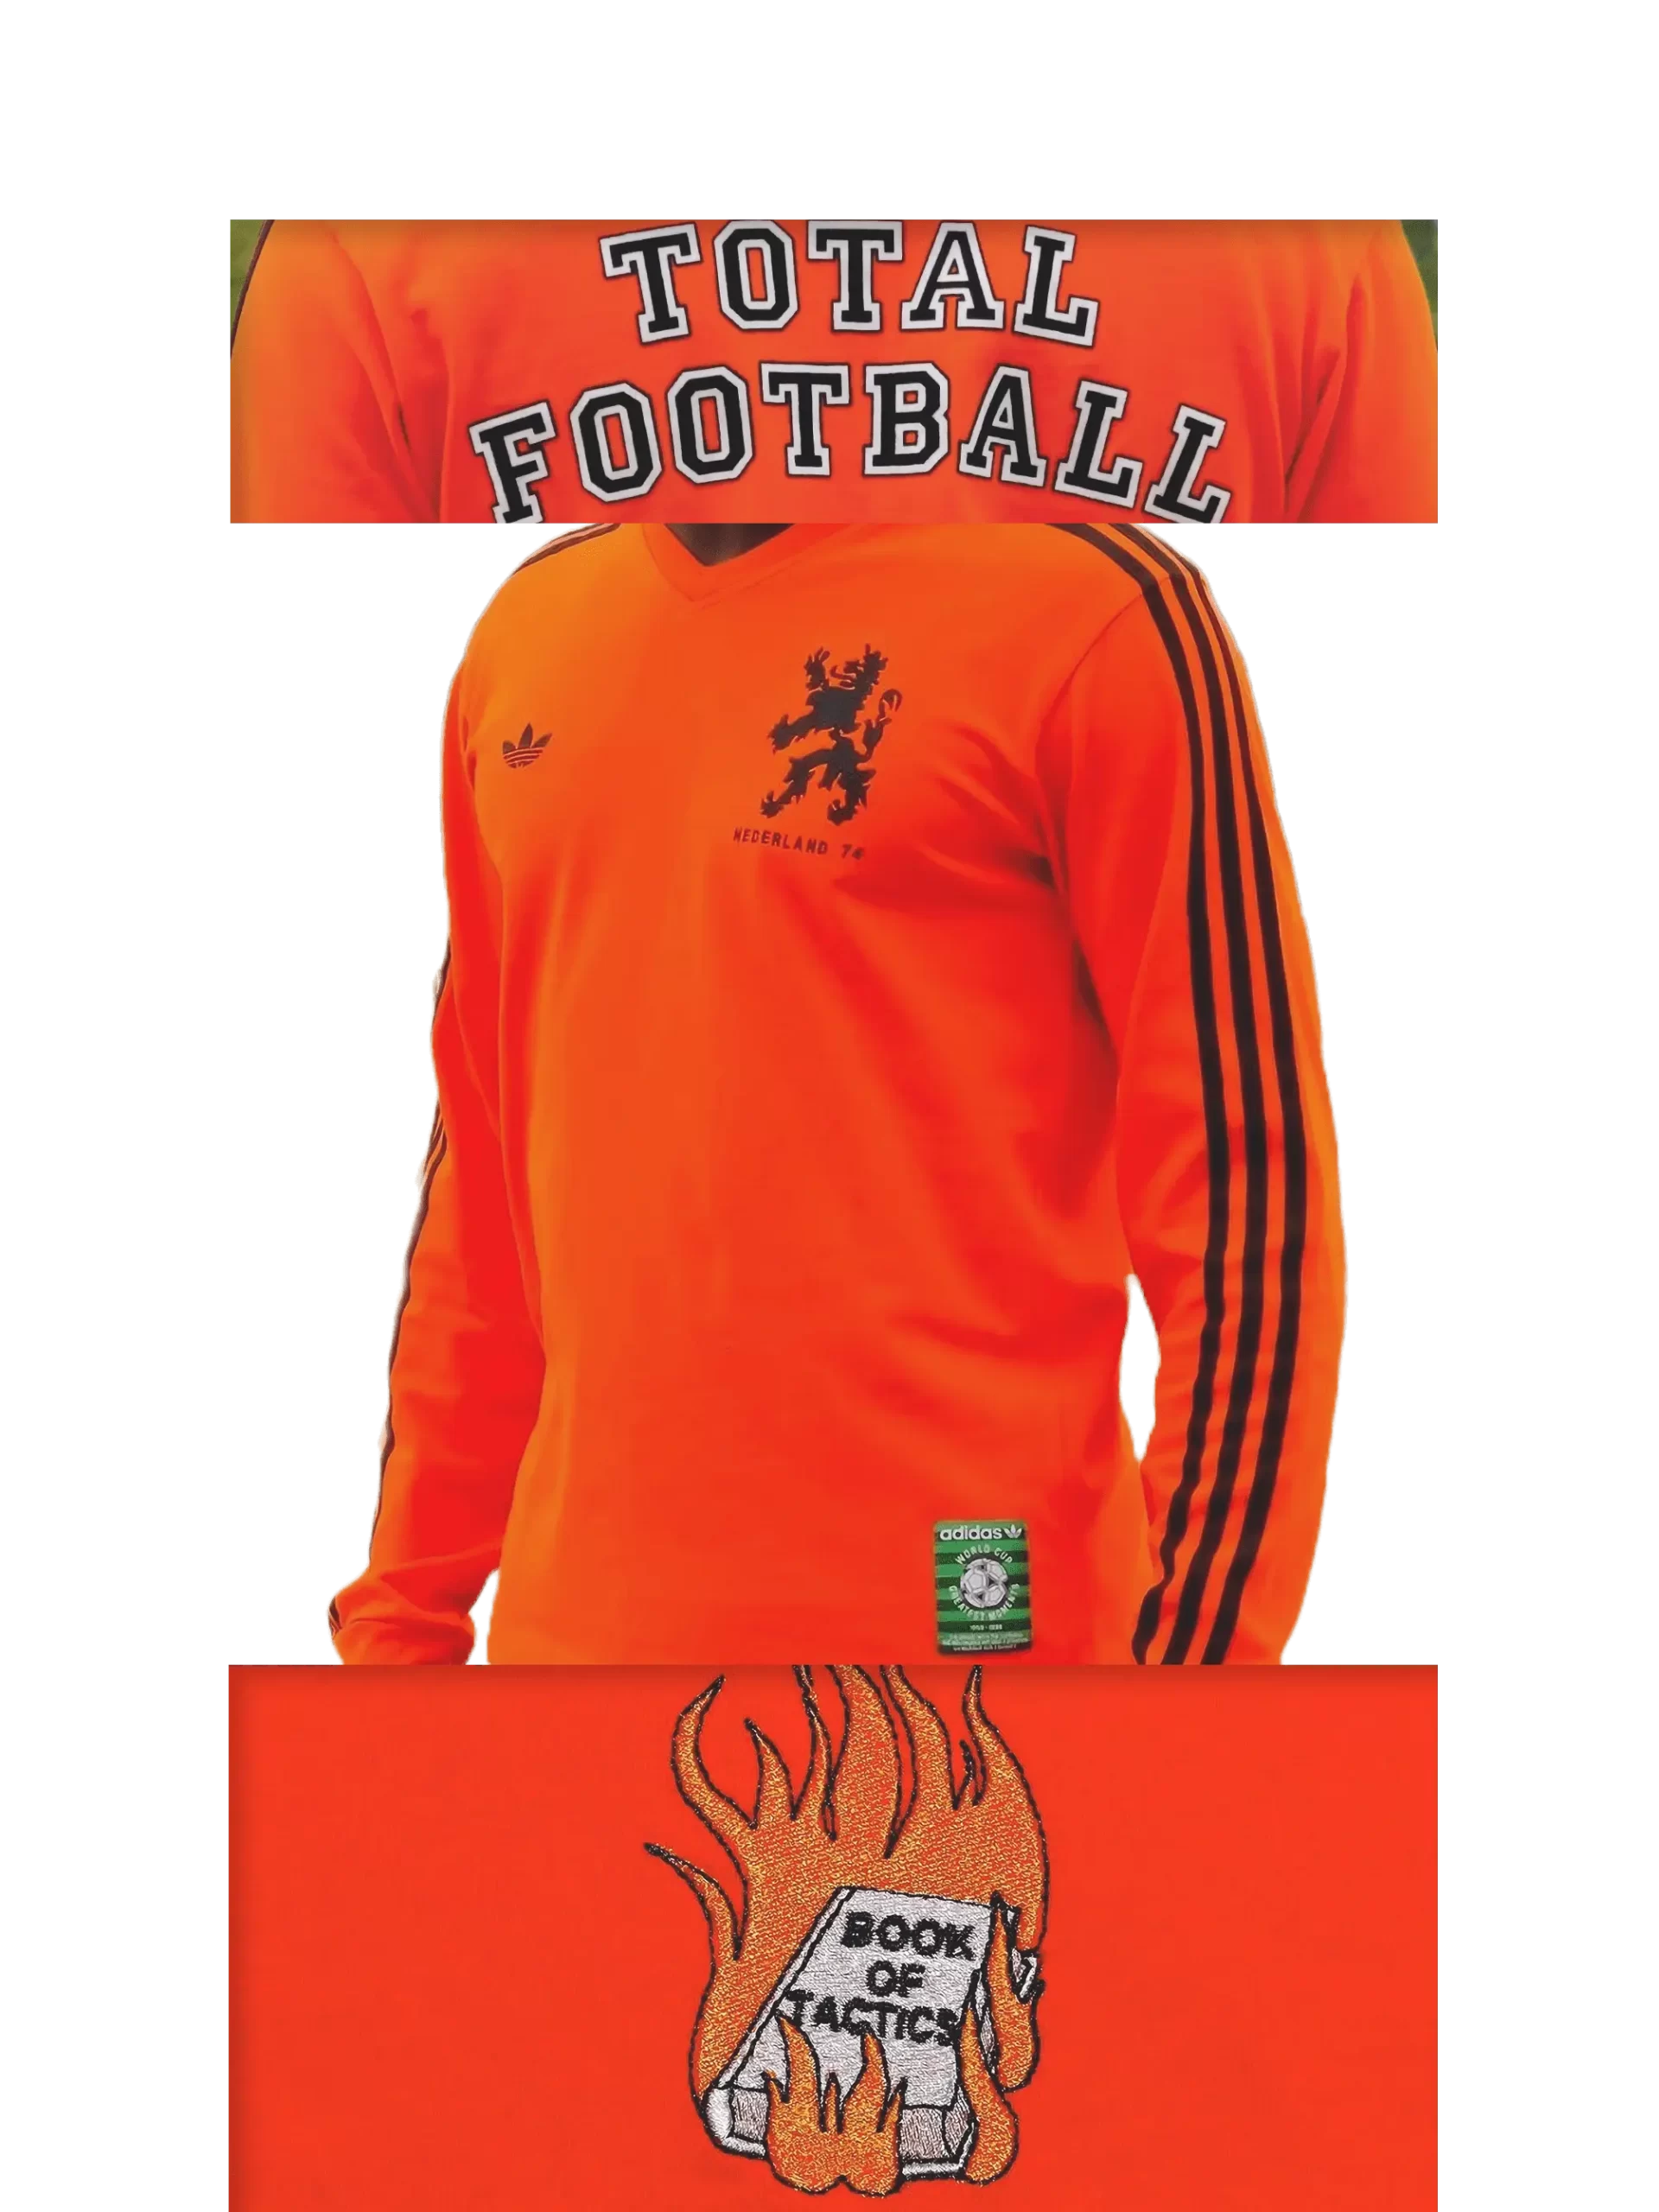 Men's 2007 Netherlands '74 Total Football LS by Adidas: Courageous (EnLawded.com file #lmchk57209ip2y123336kg9st)